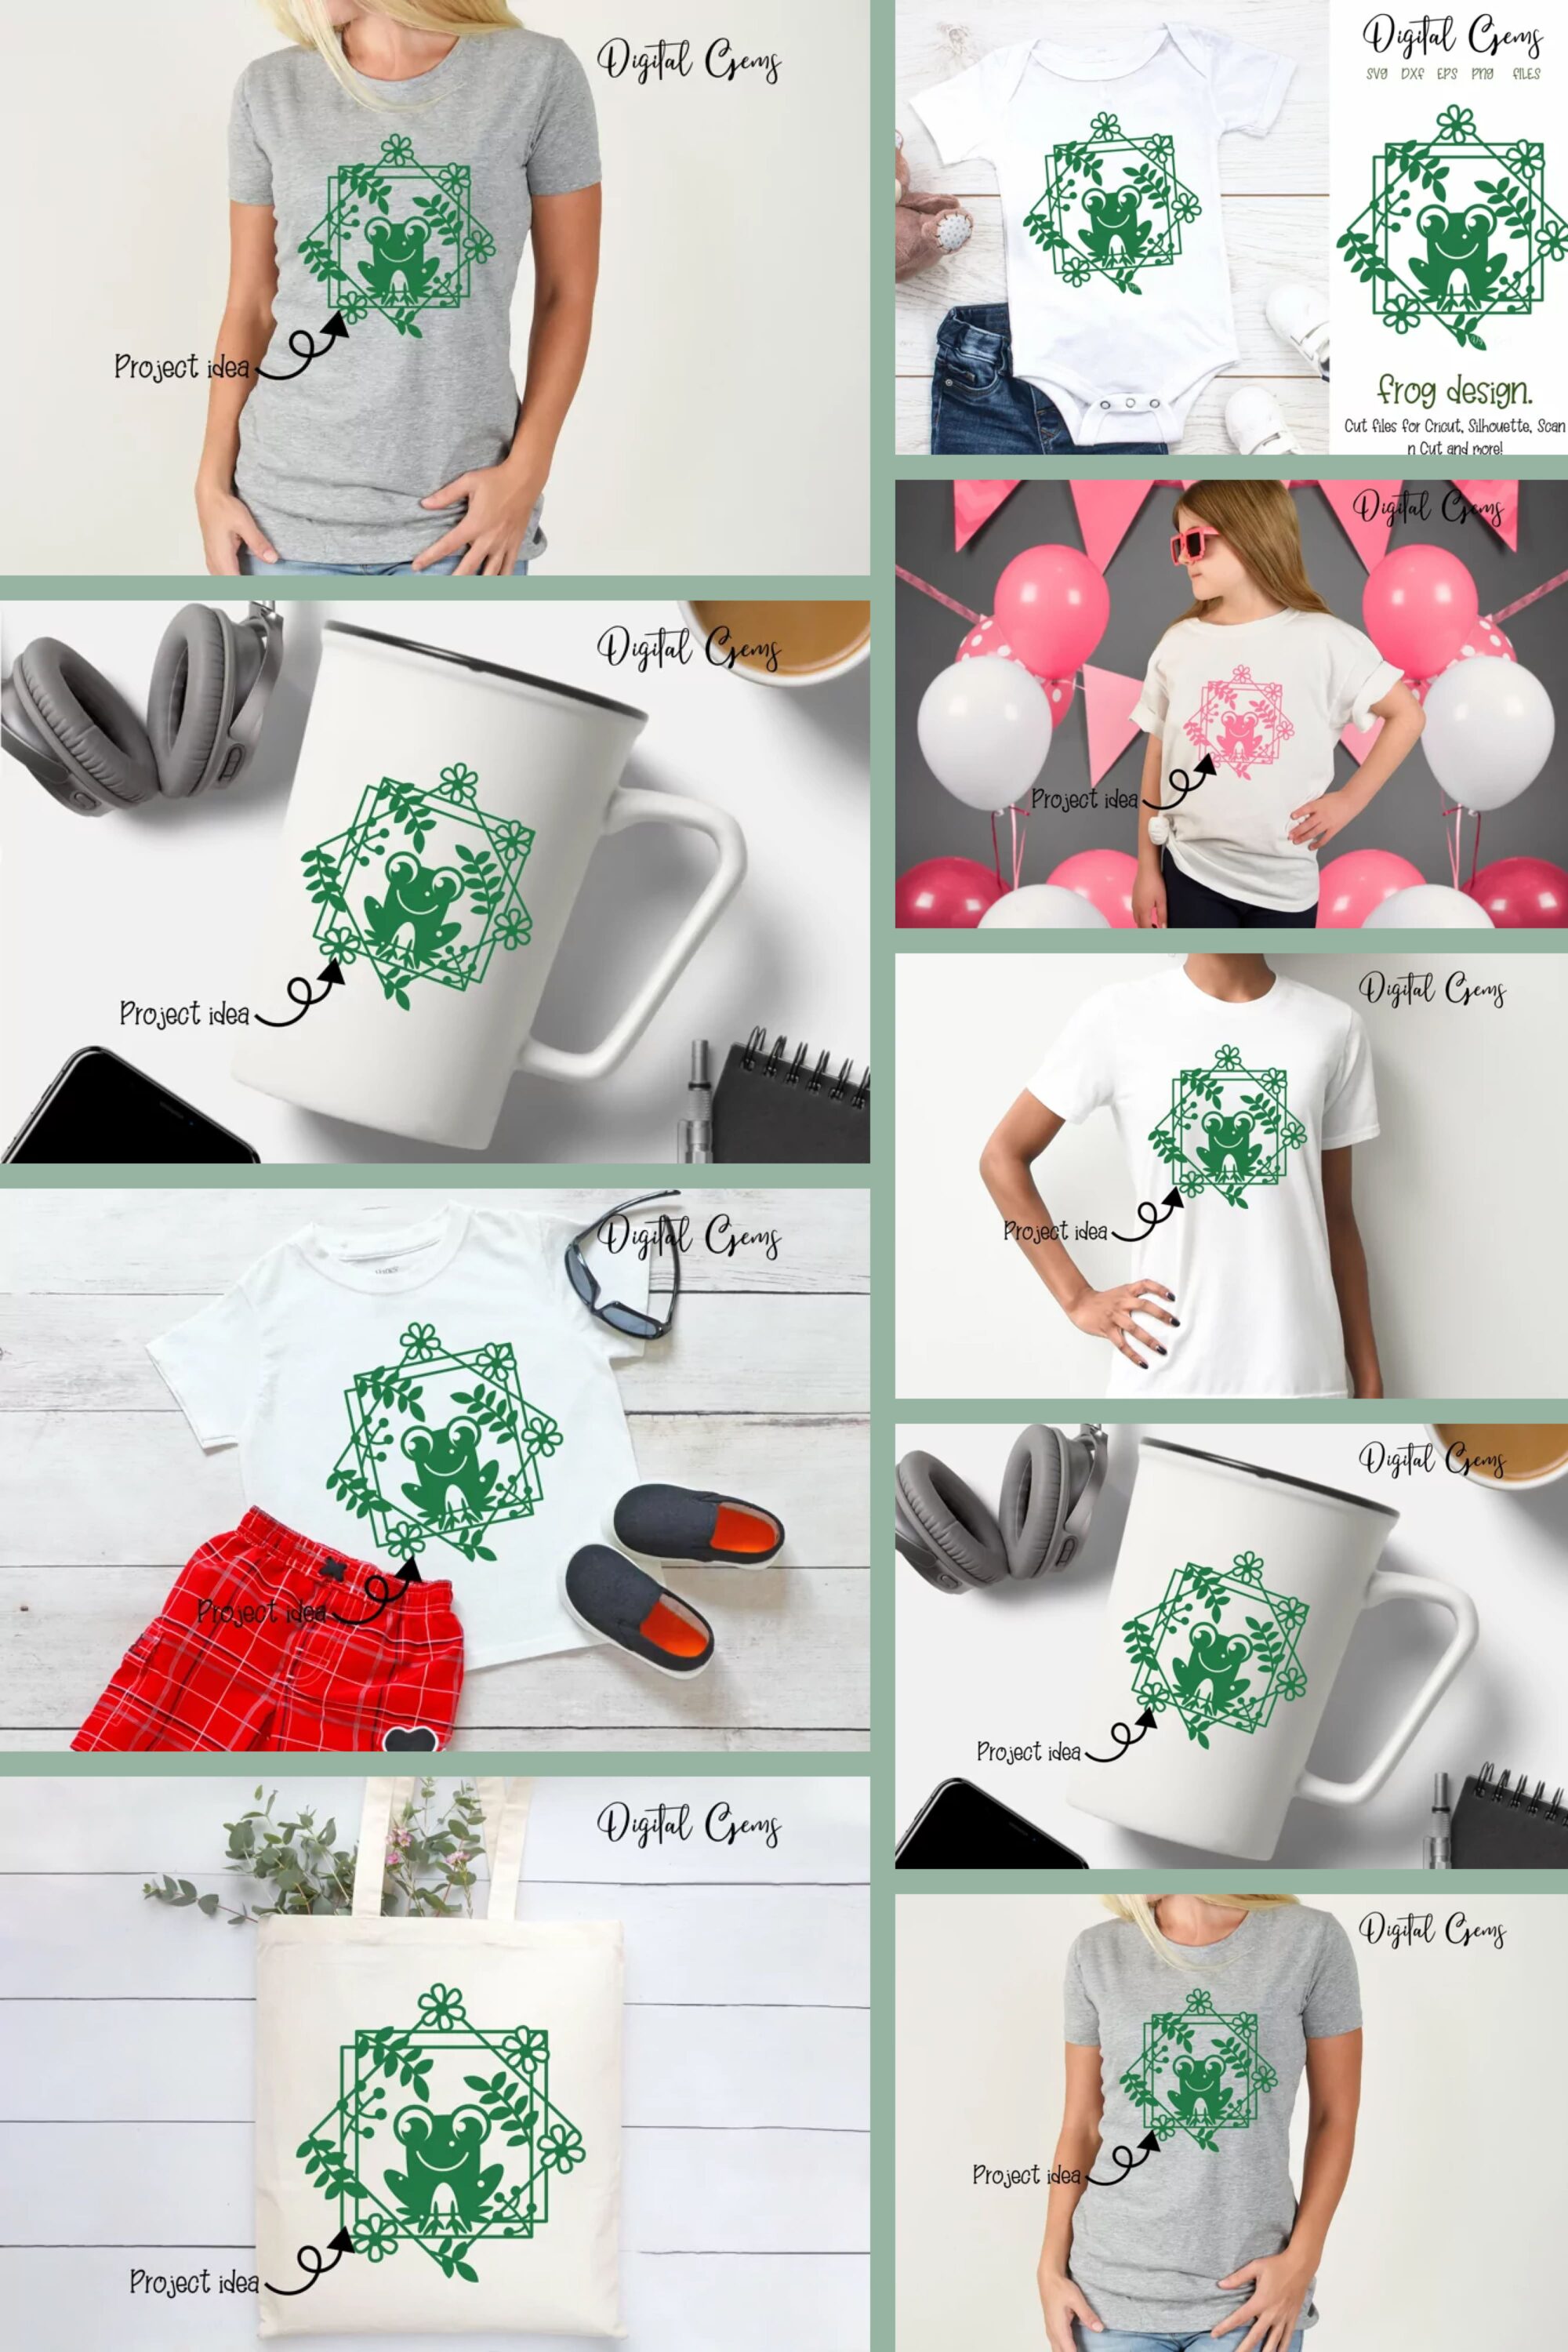 Collage of photos showing how to make a t - shirt.